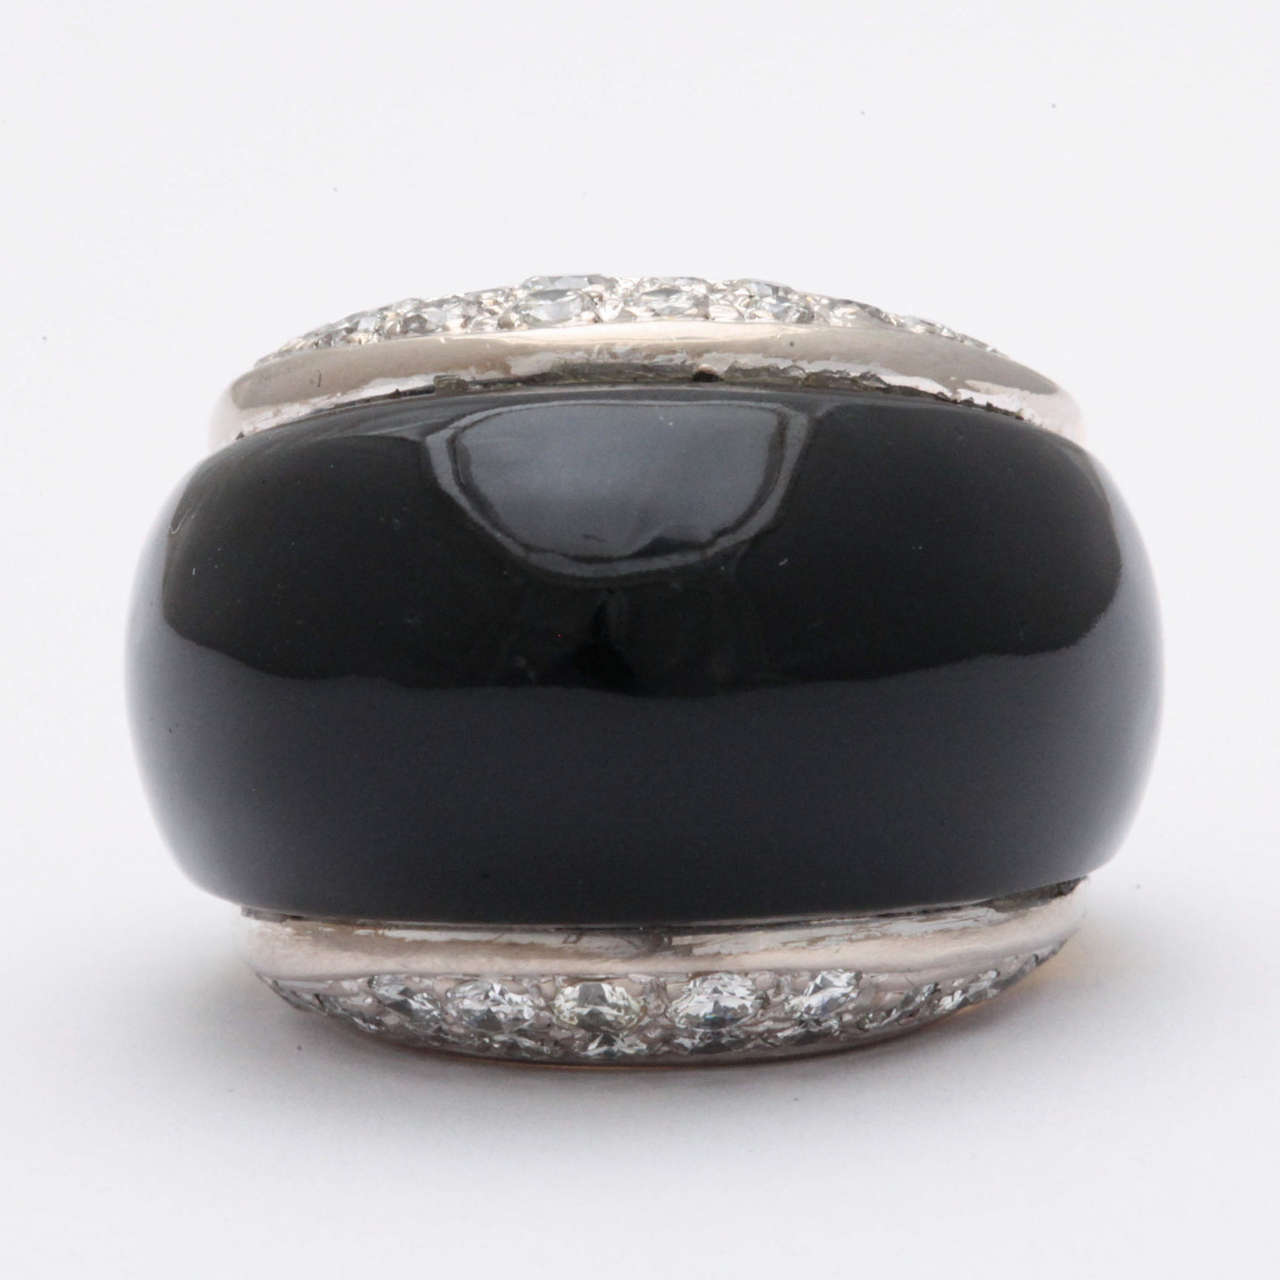 High style 18kt Yellow Gold Ring with pave set Diamond sides set in Platinum and polished Black Onyx Body.  Super sophisticated. Size 6.5